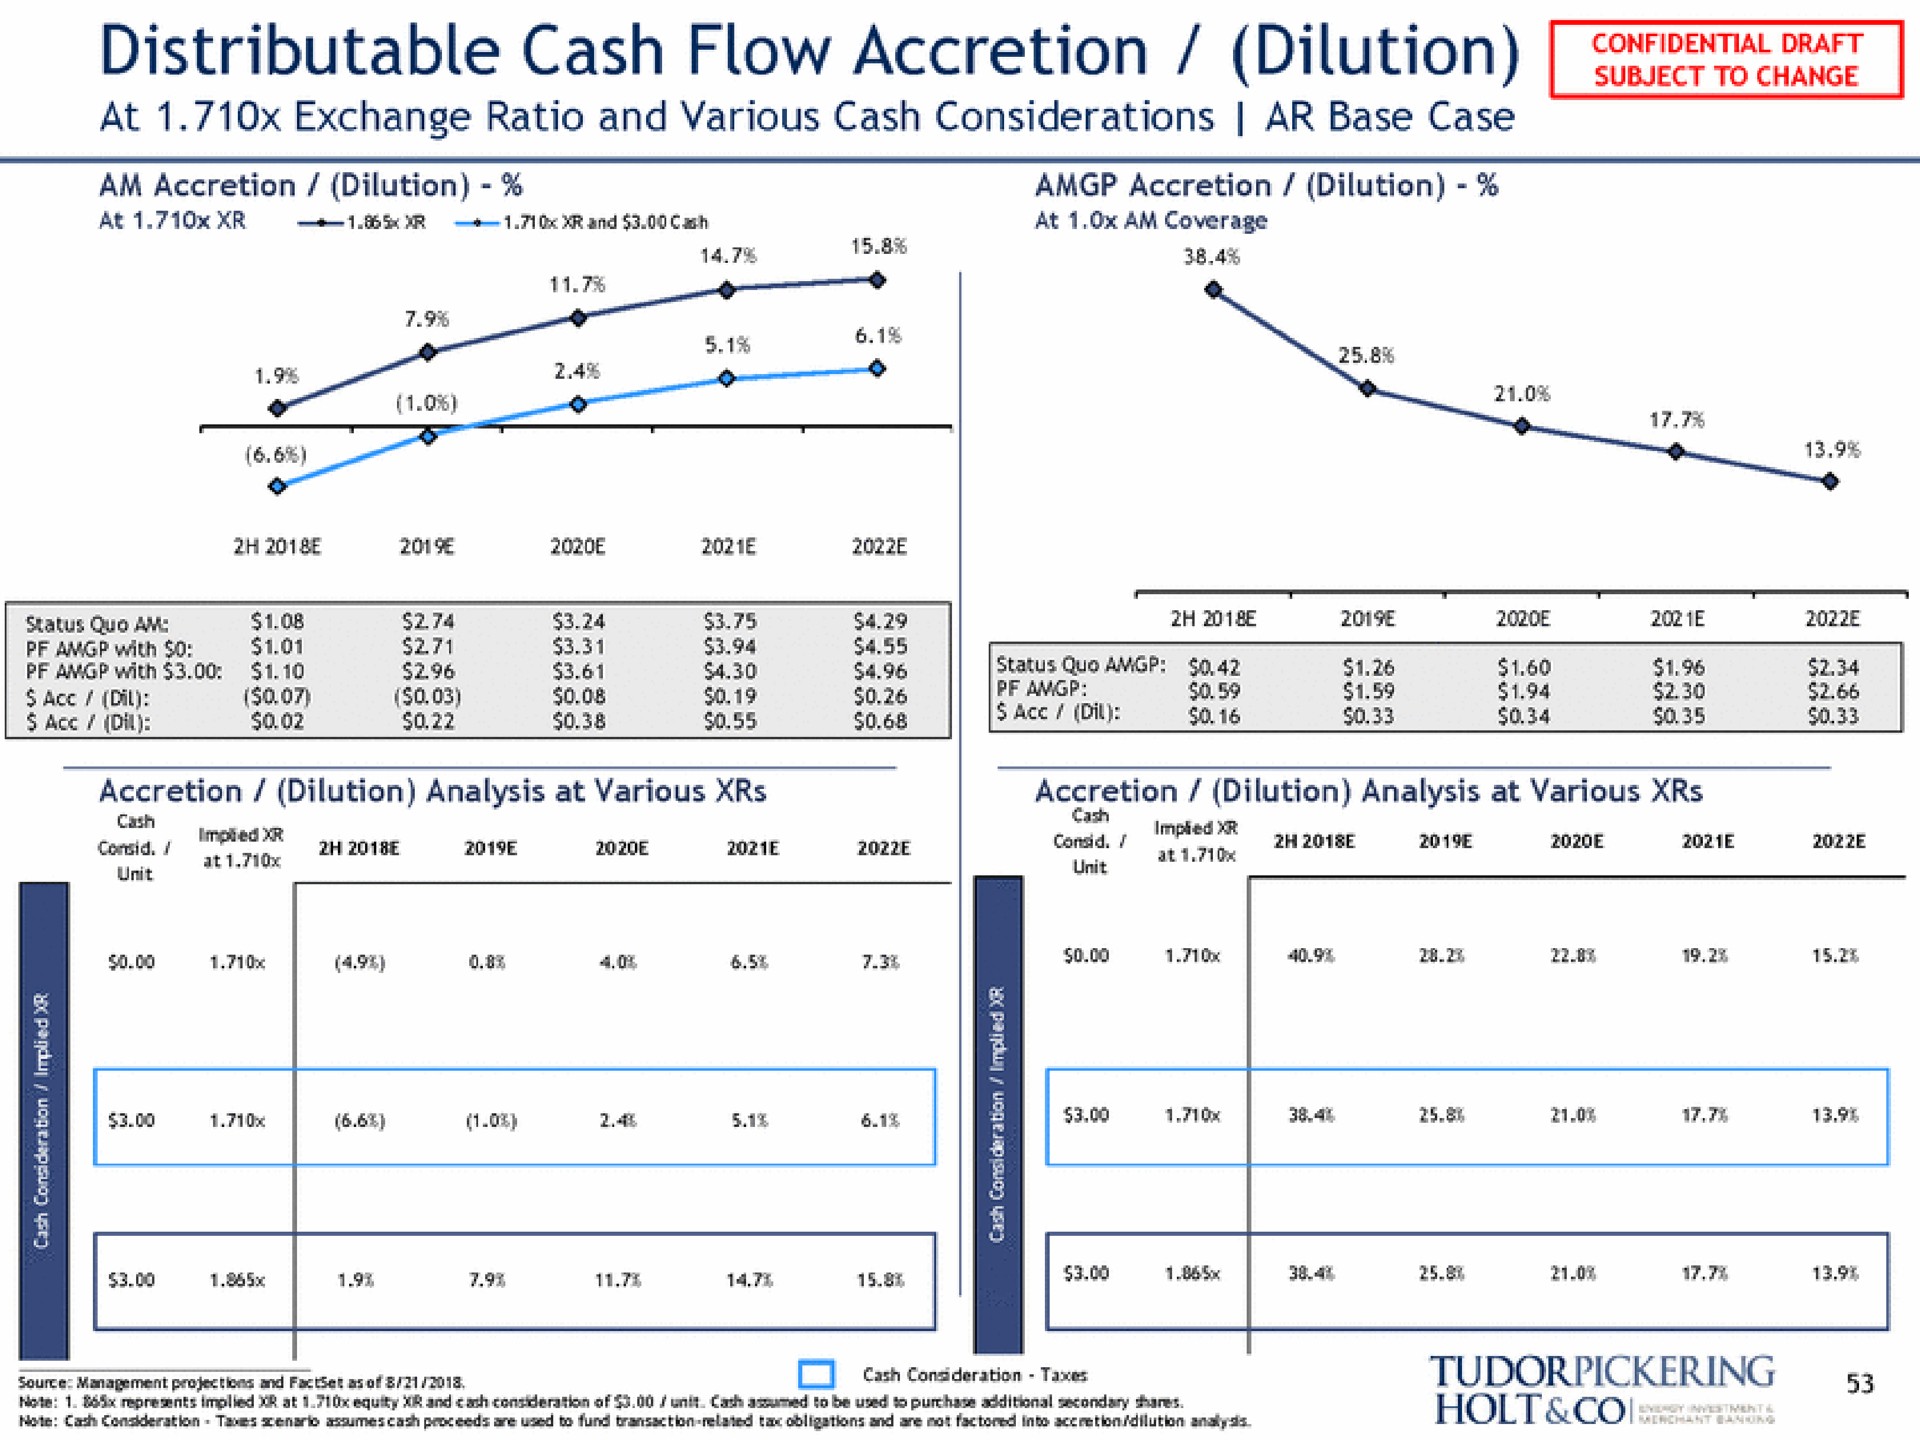 distributable cash flow accretion dilution at exchange ratio and various cash considerations base case | Tudor, Pickering, Holt & Co